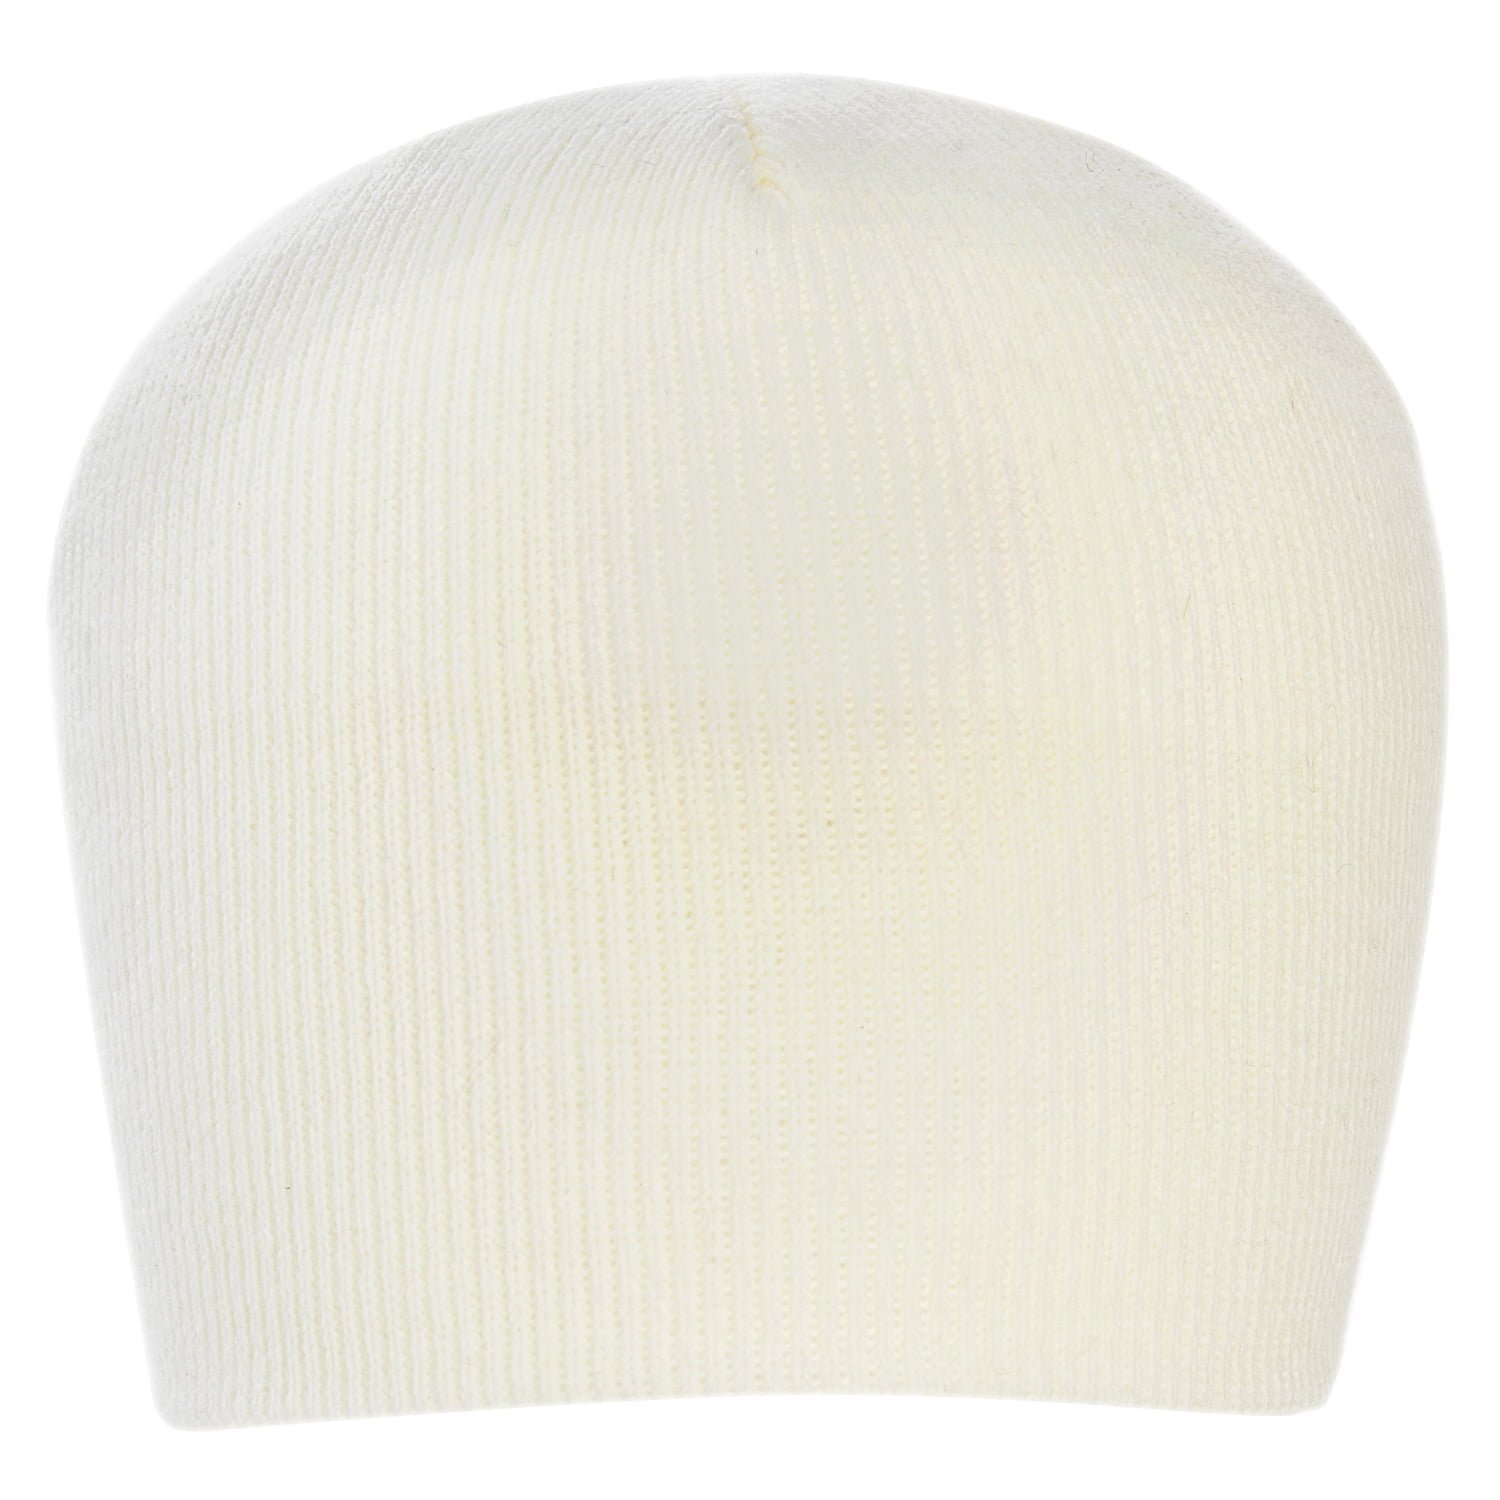 Natural Thinsulate Beanie - 40 gram - Single Piece - Made in USA